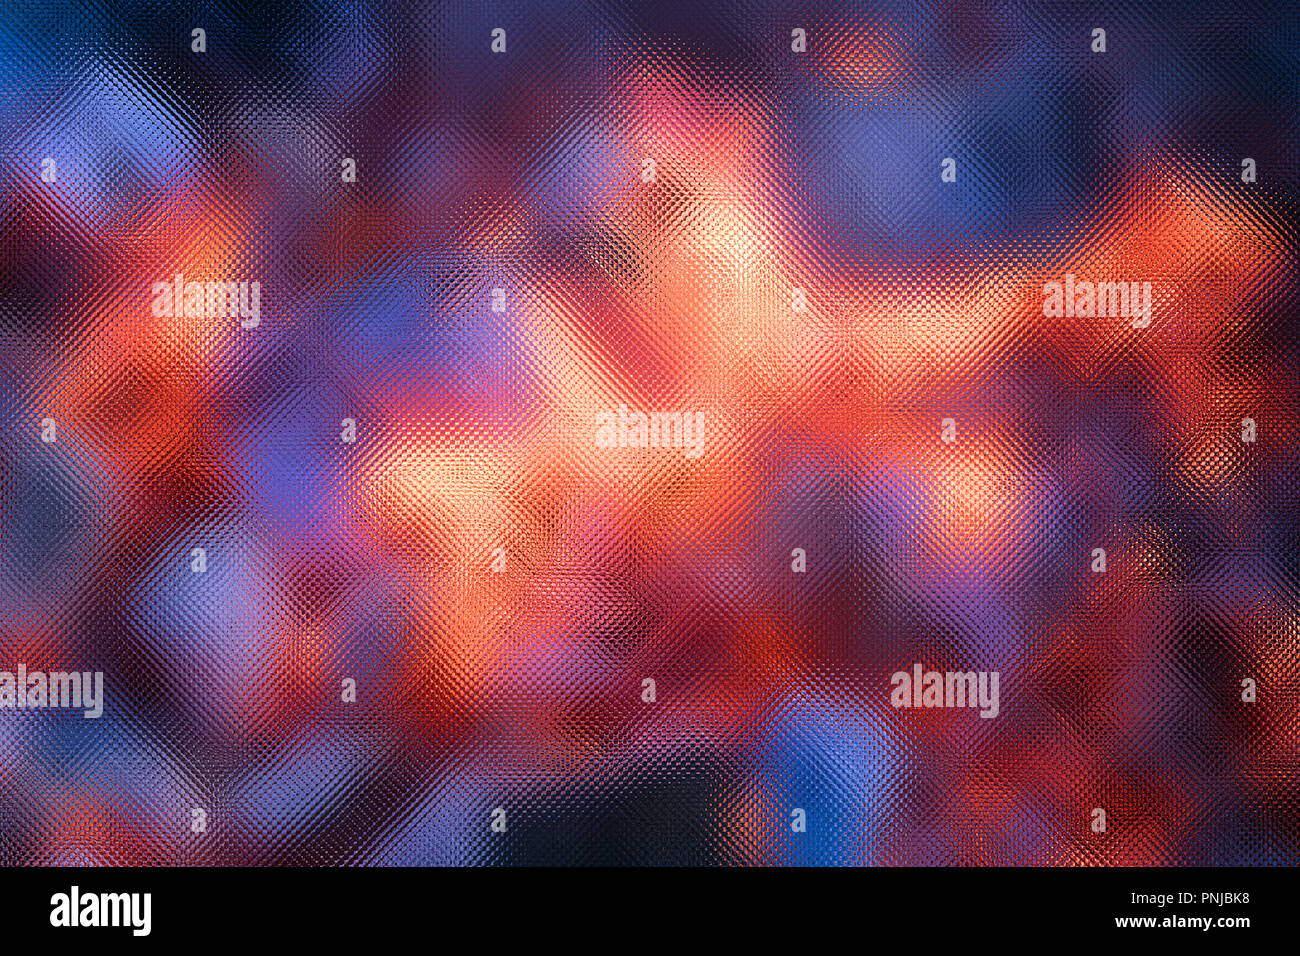 Blurred glowing hot coals and ash with glass screen effect, bright abstract background Stock Photo